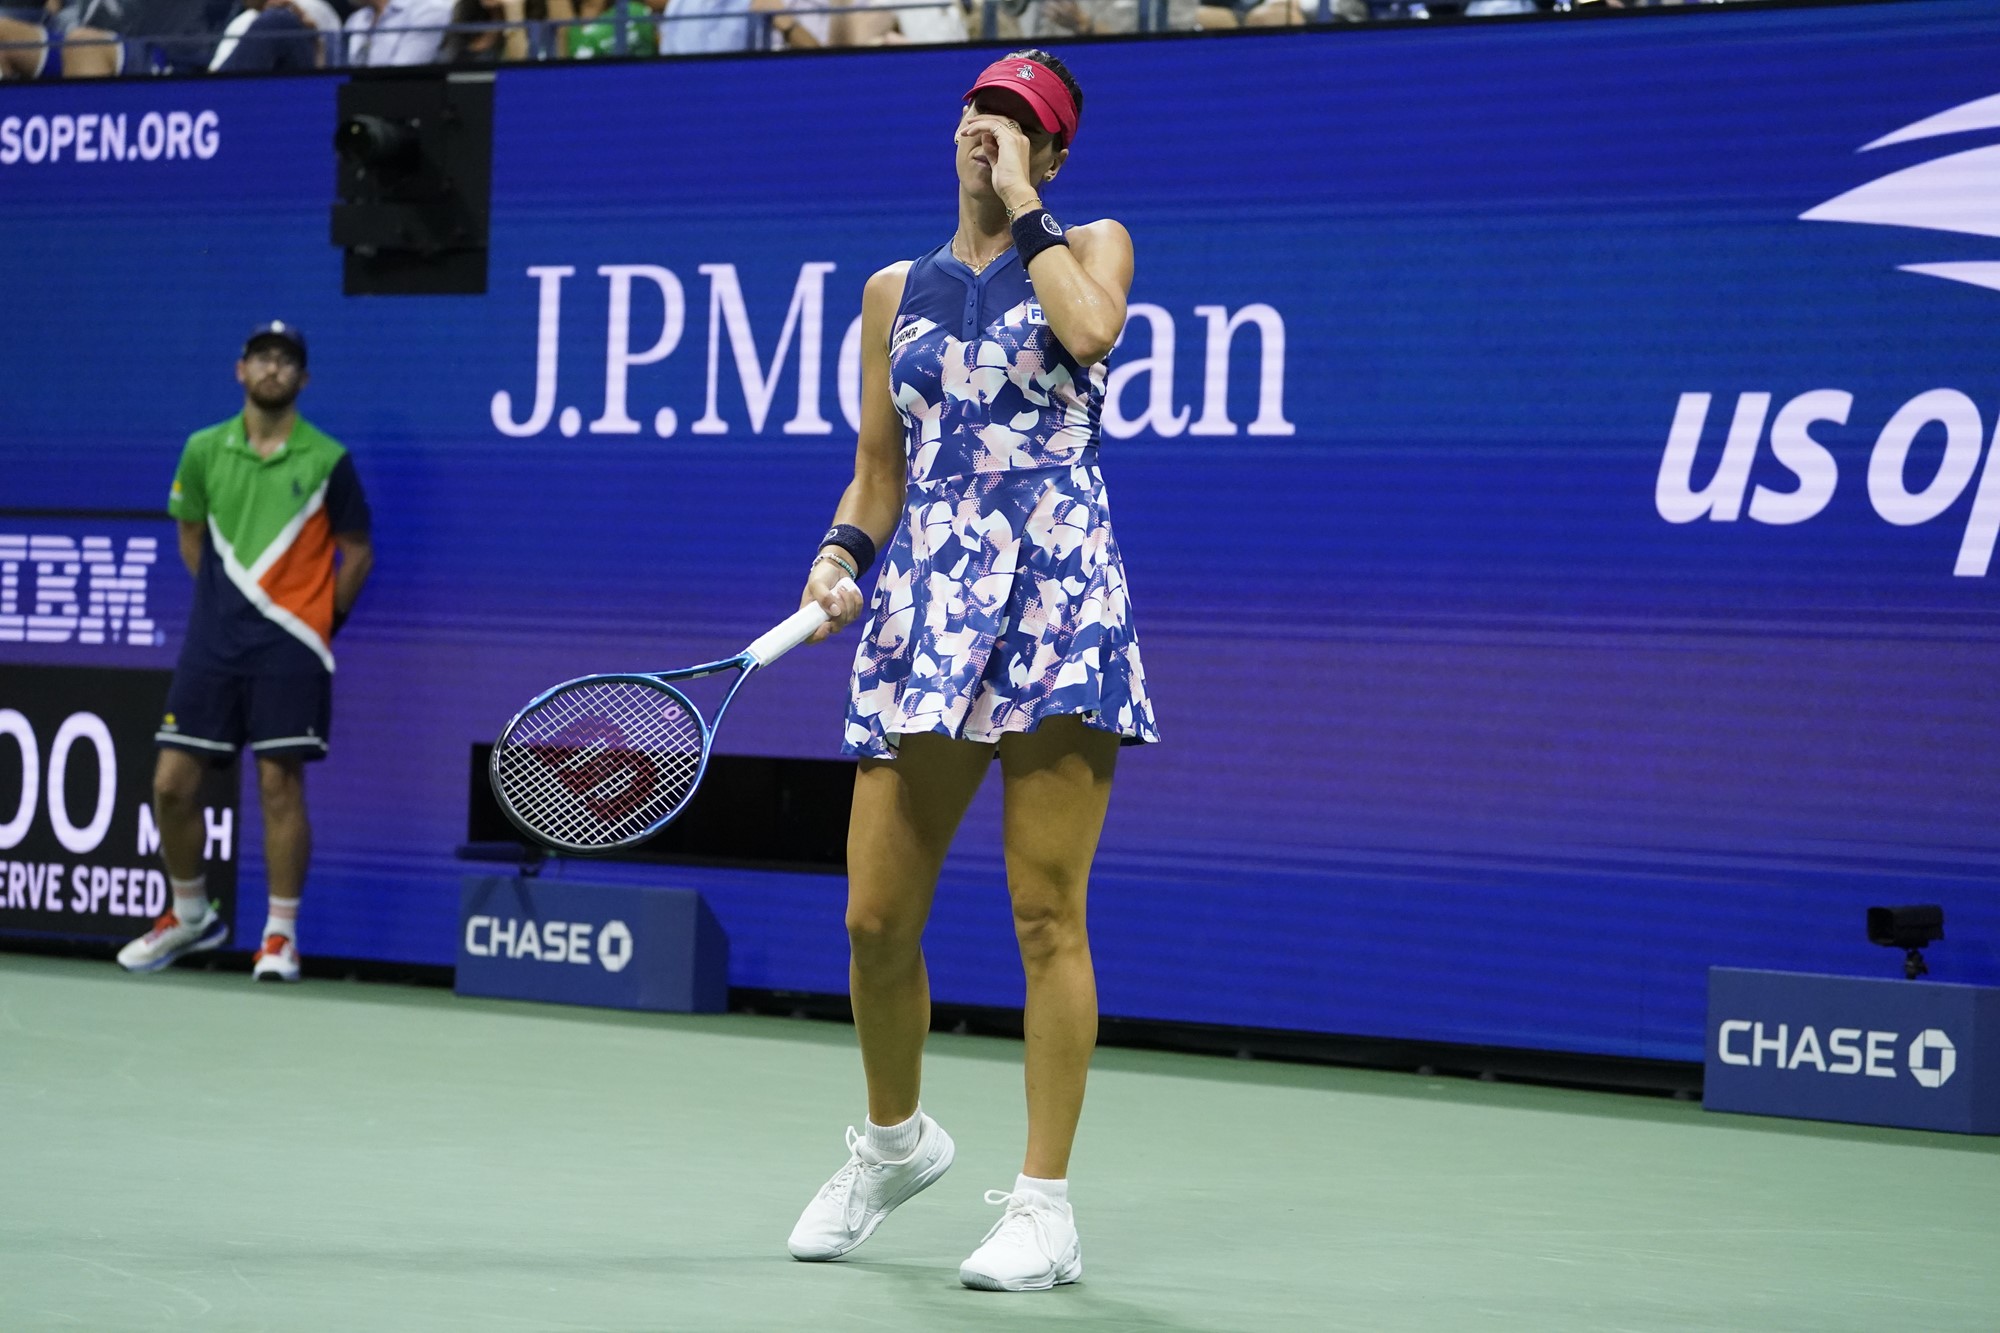 Ajla Tomljanović holds her hand to her face during a US Open match.